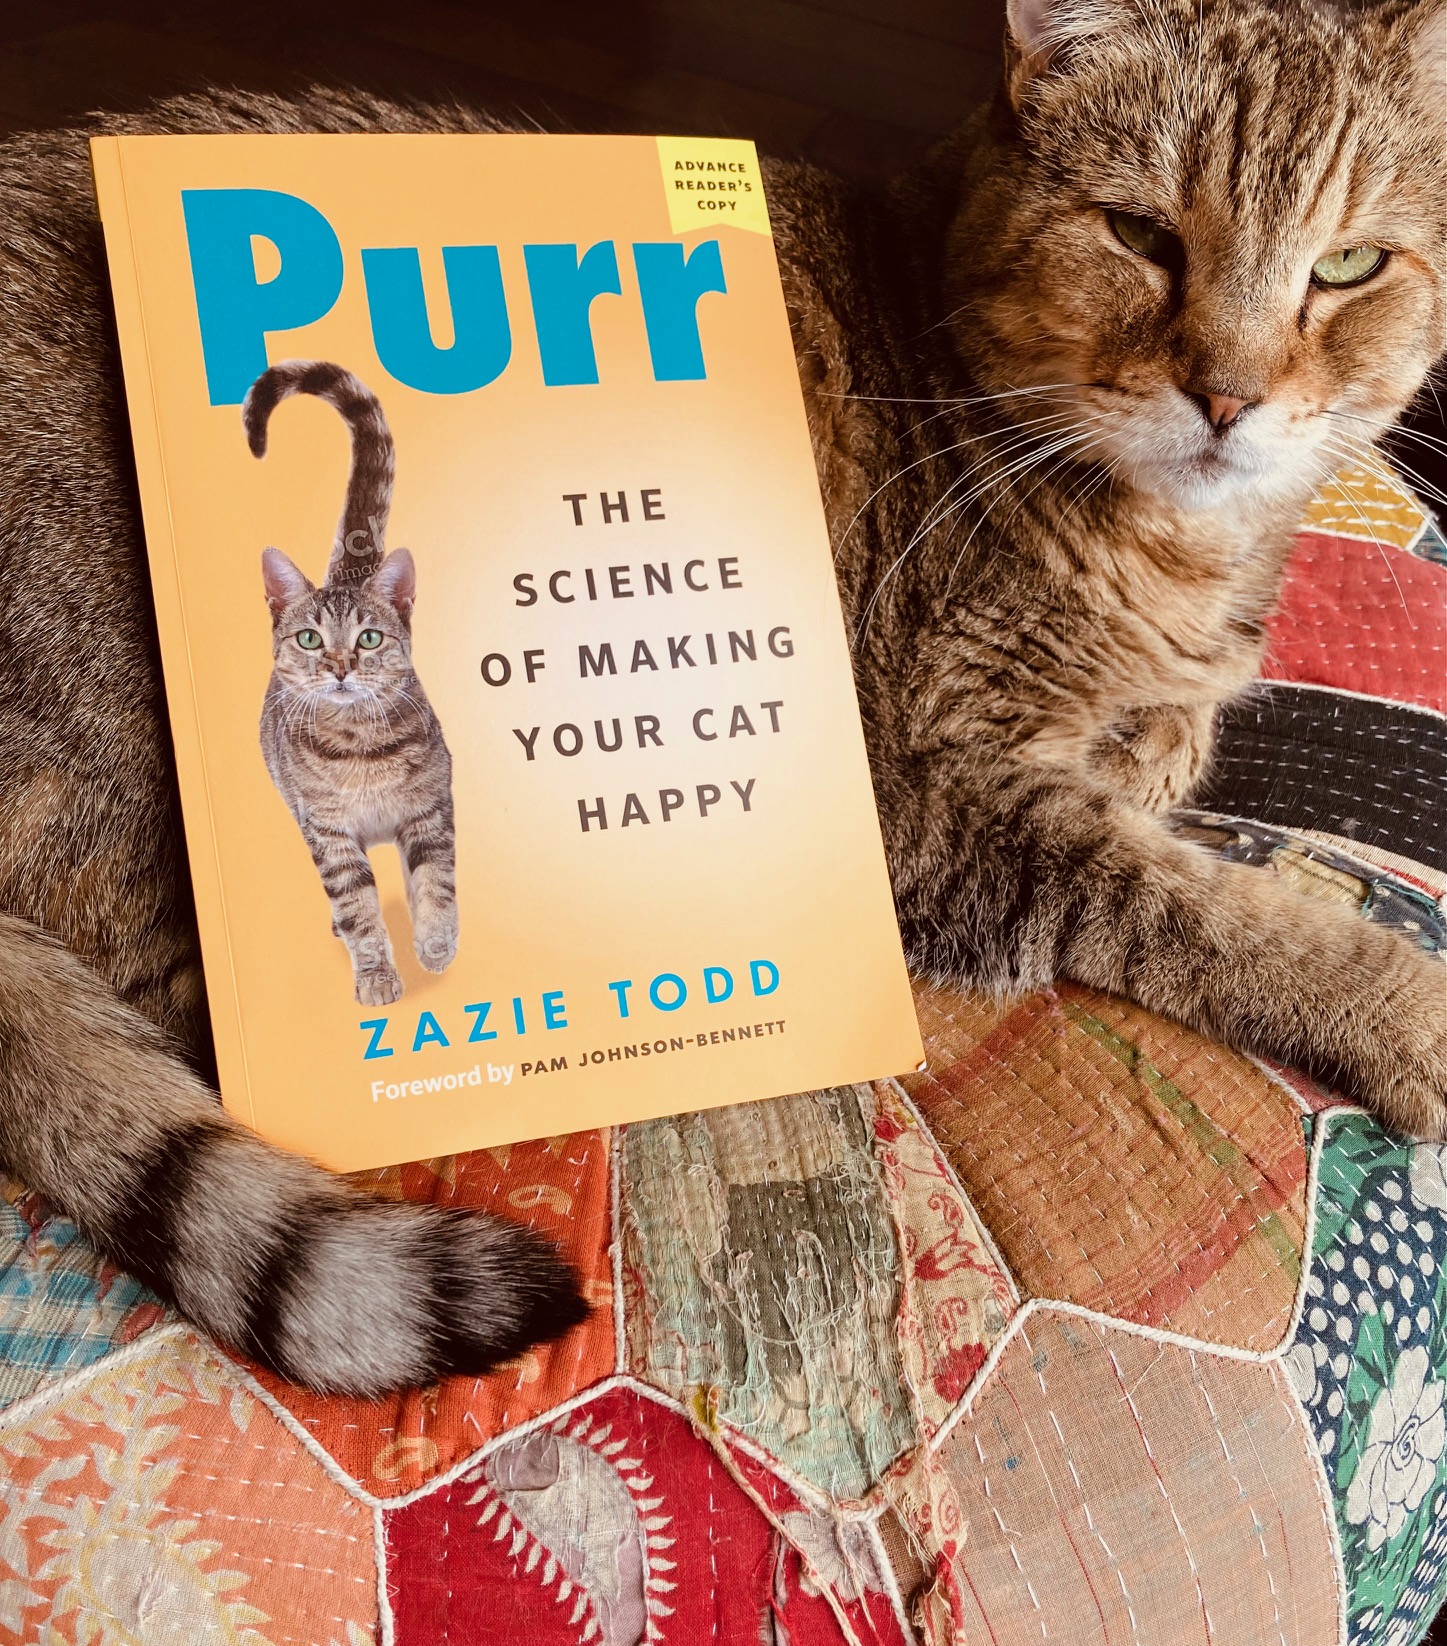 Purr, The Science of Making Your Cat Happy by Zazie Todd book